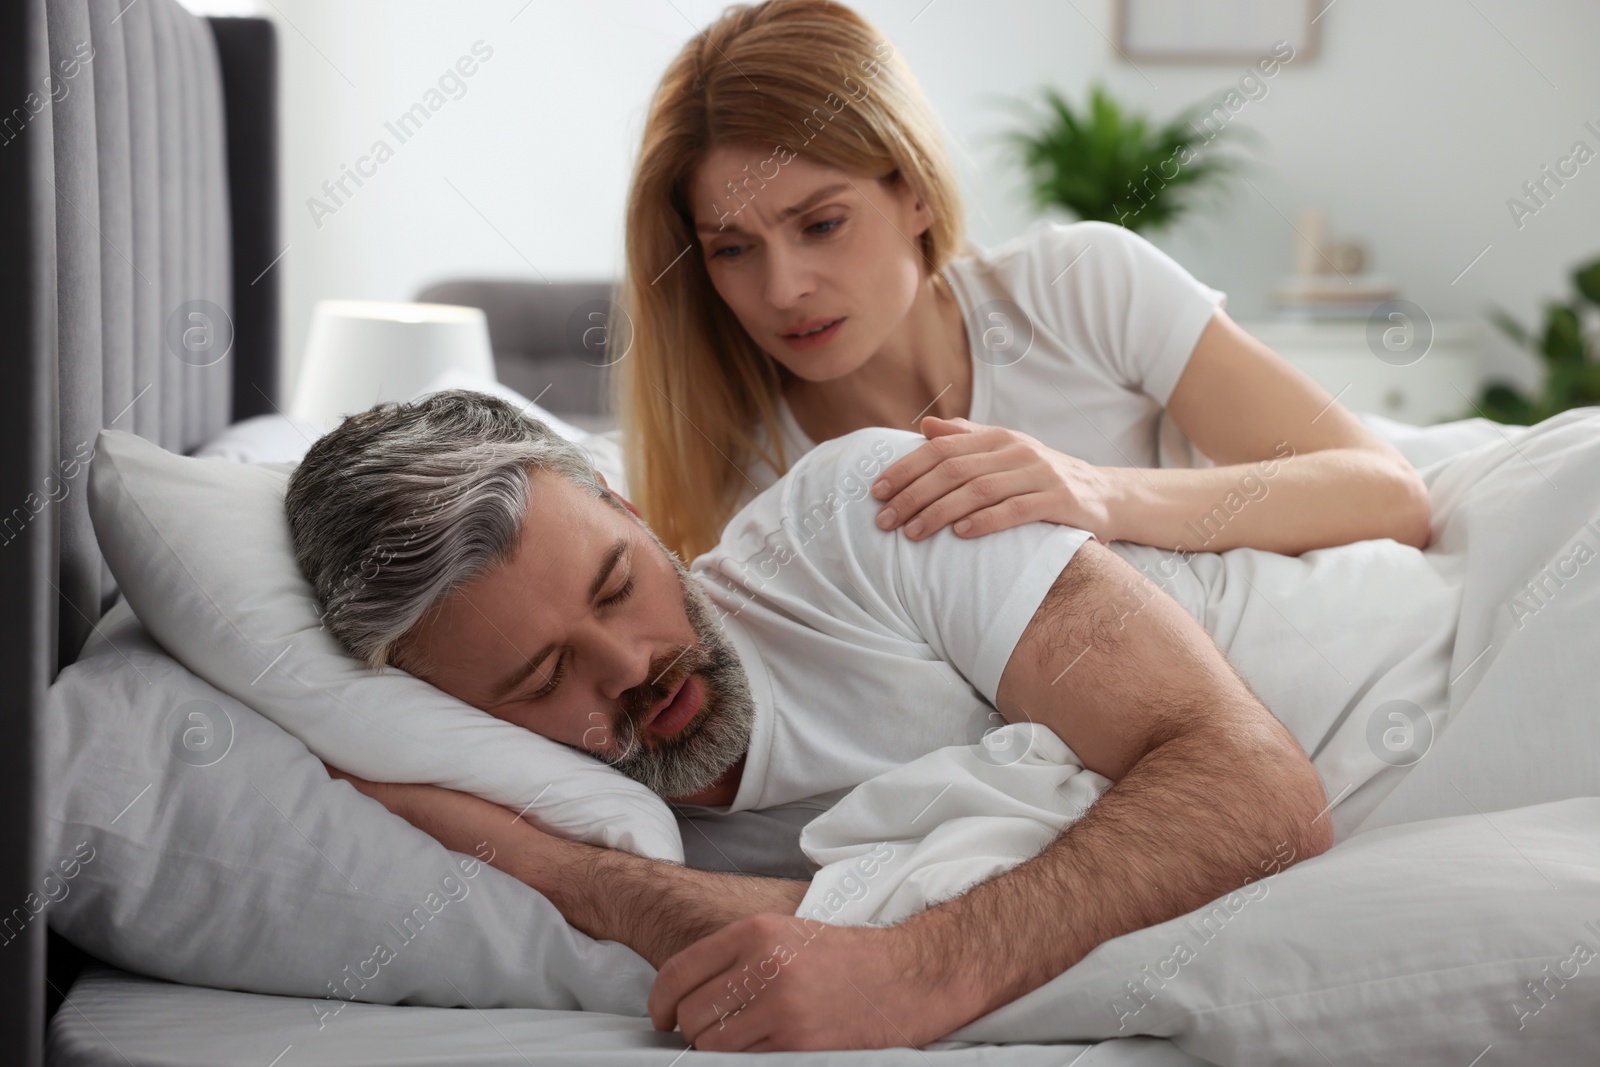 Photo of Irritated woman waking up her snoring husband in bed at home